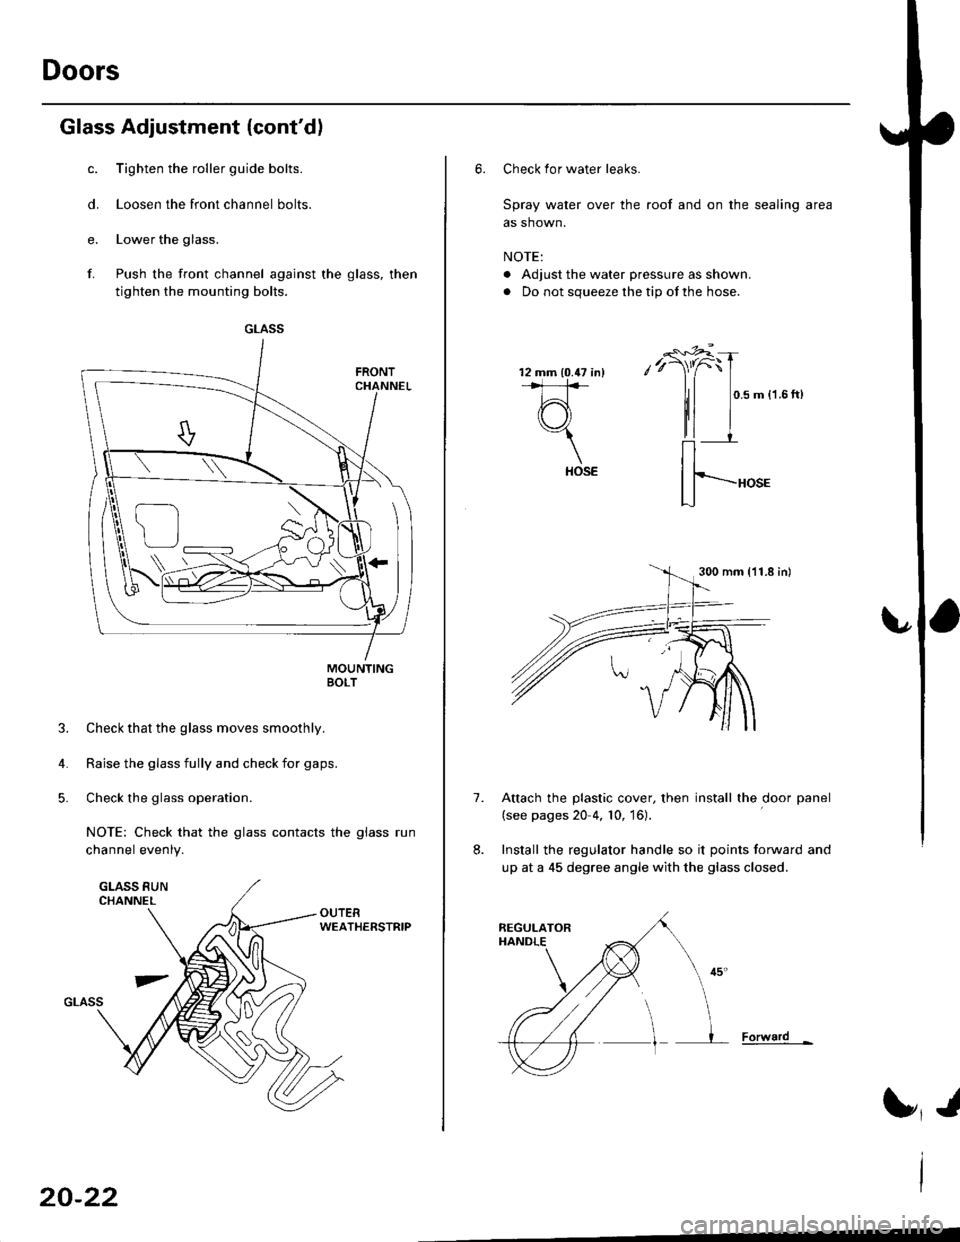 HONDA CIVIC 1997 6.G Workshop Manual Doors
Glass Adjustment {contd)
c. Tighten the roller guide bolts.
d. Loosen the front channel bolts.
e. Lower the glass.
f. Push the front channel against the glass, then
tighten the mounting bolts.
